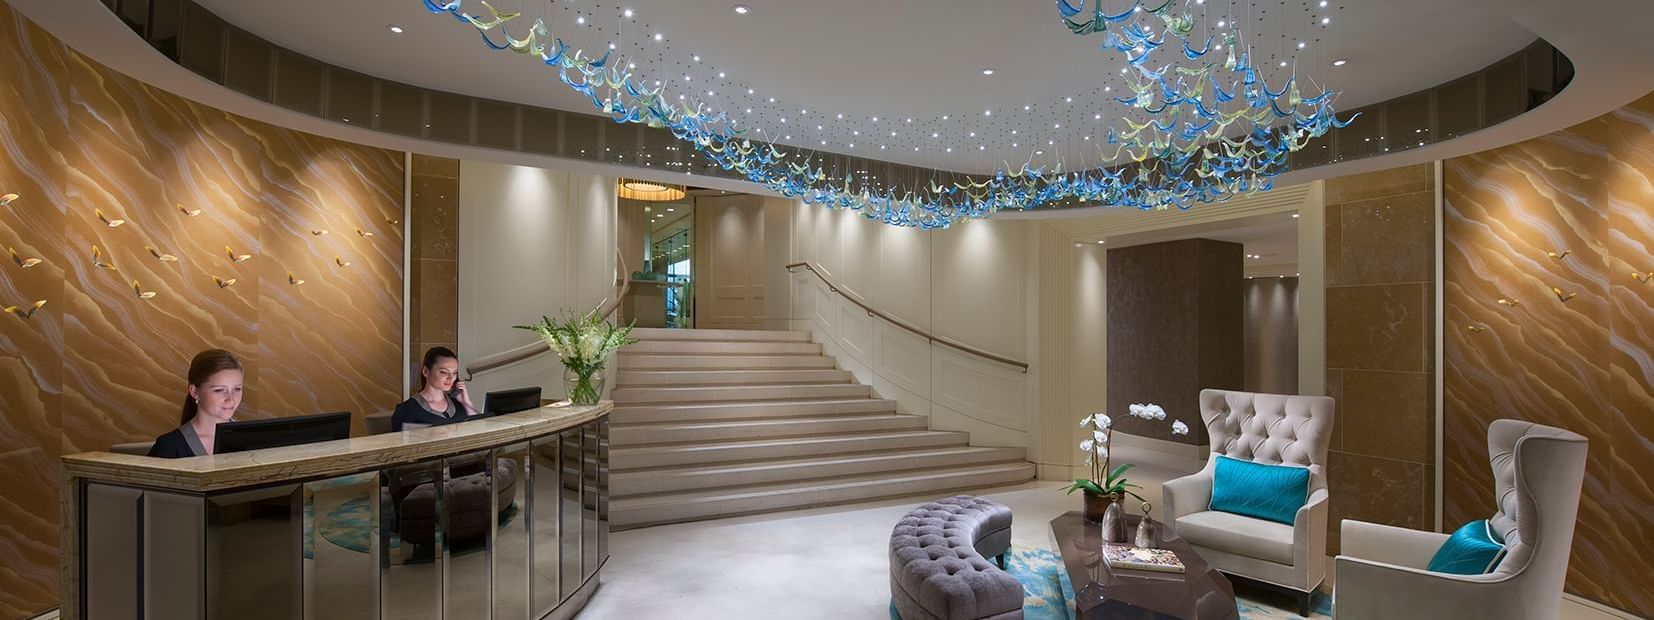 Reception area & lobby in crown spa at Crown Hotels Group